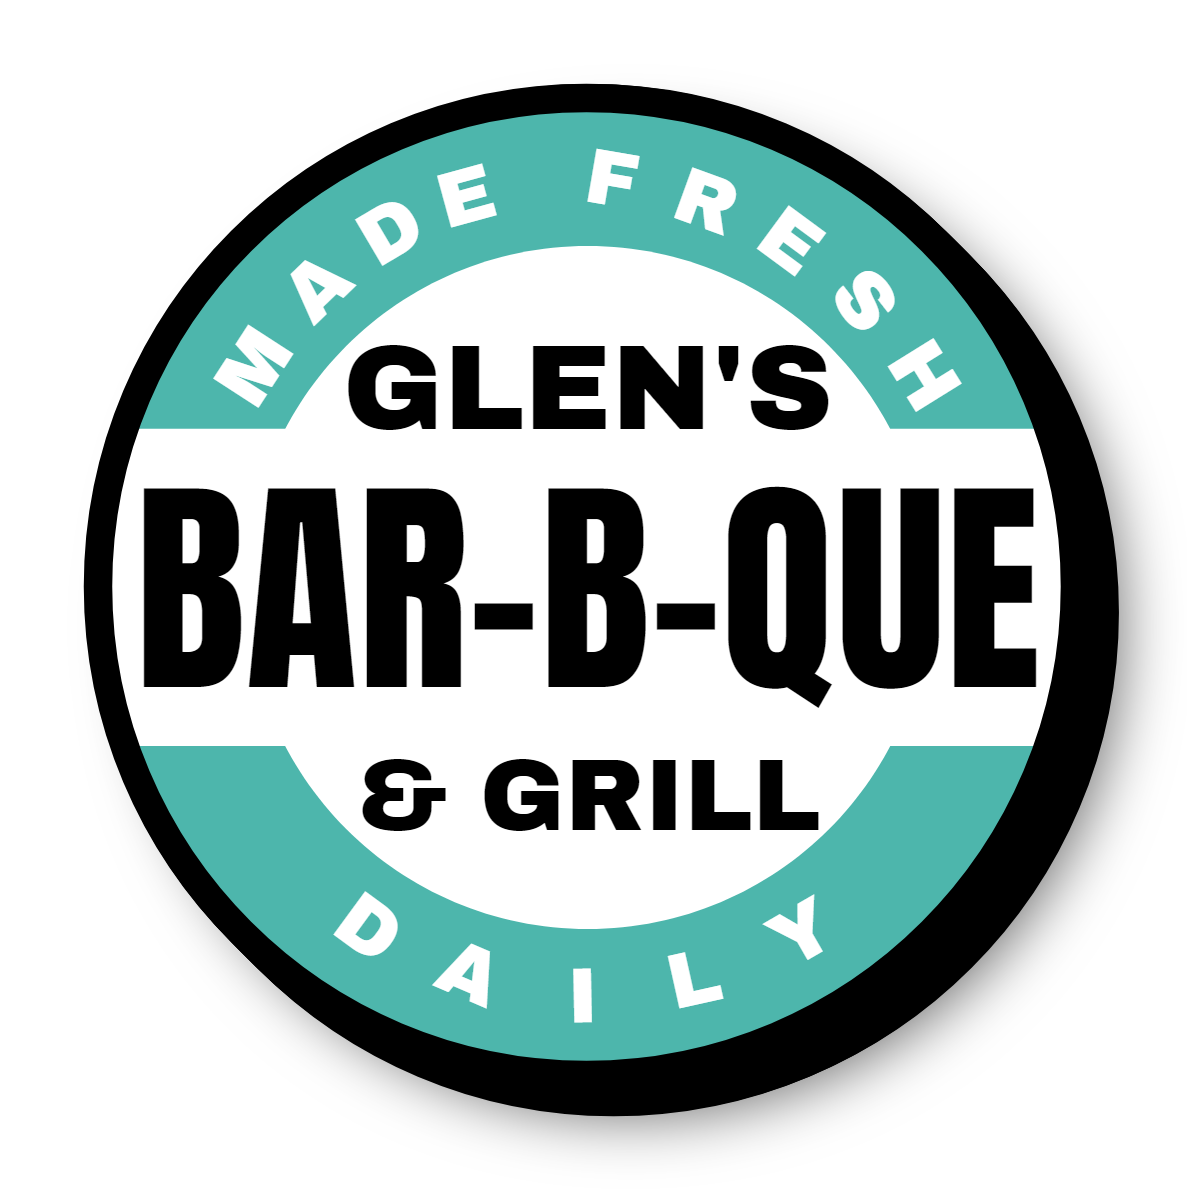 Glen's Bar-b-Que & Grill Single Face Lit Shaped Cabinet Sign